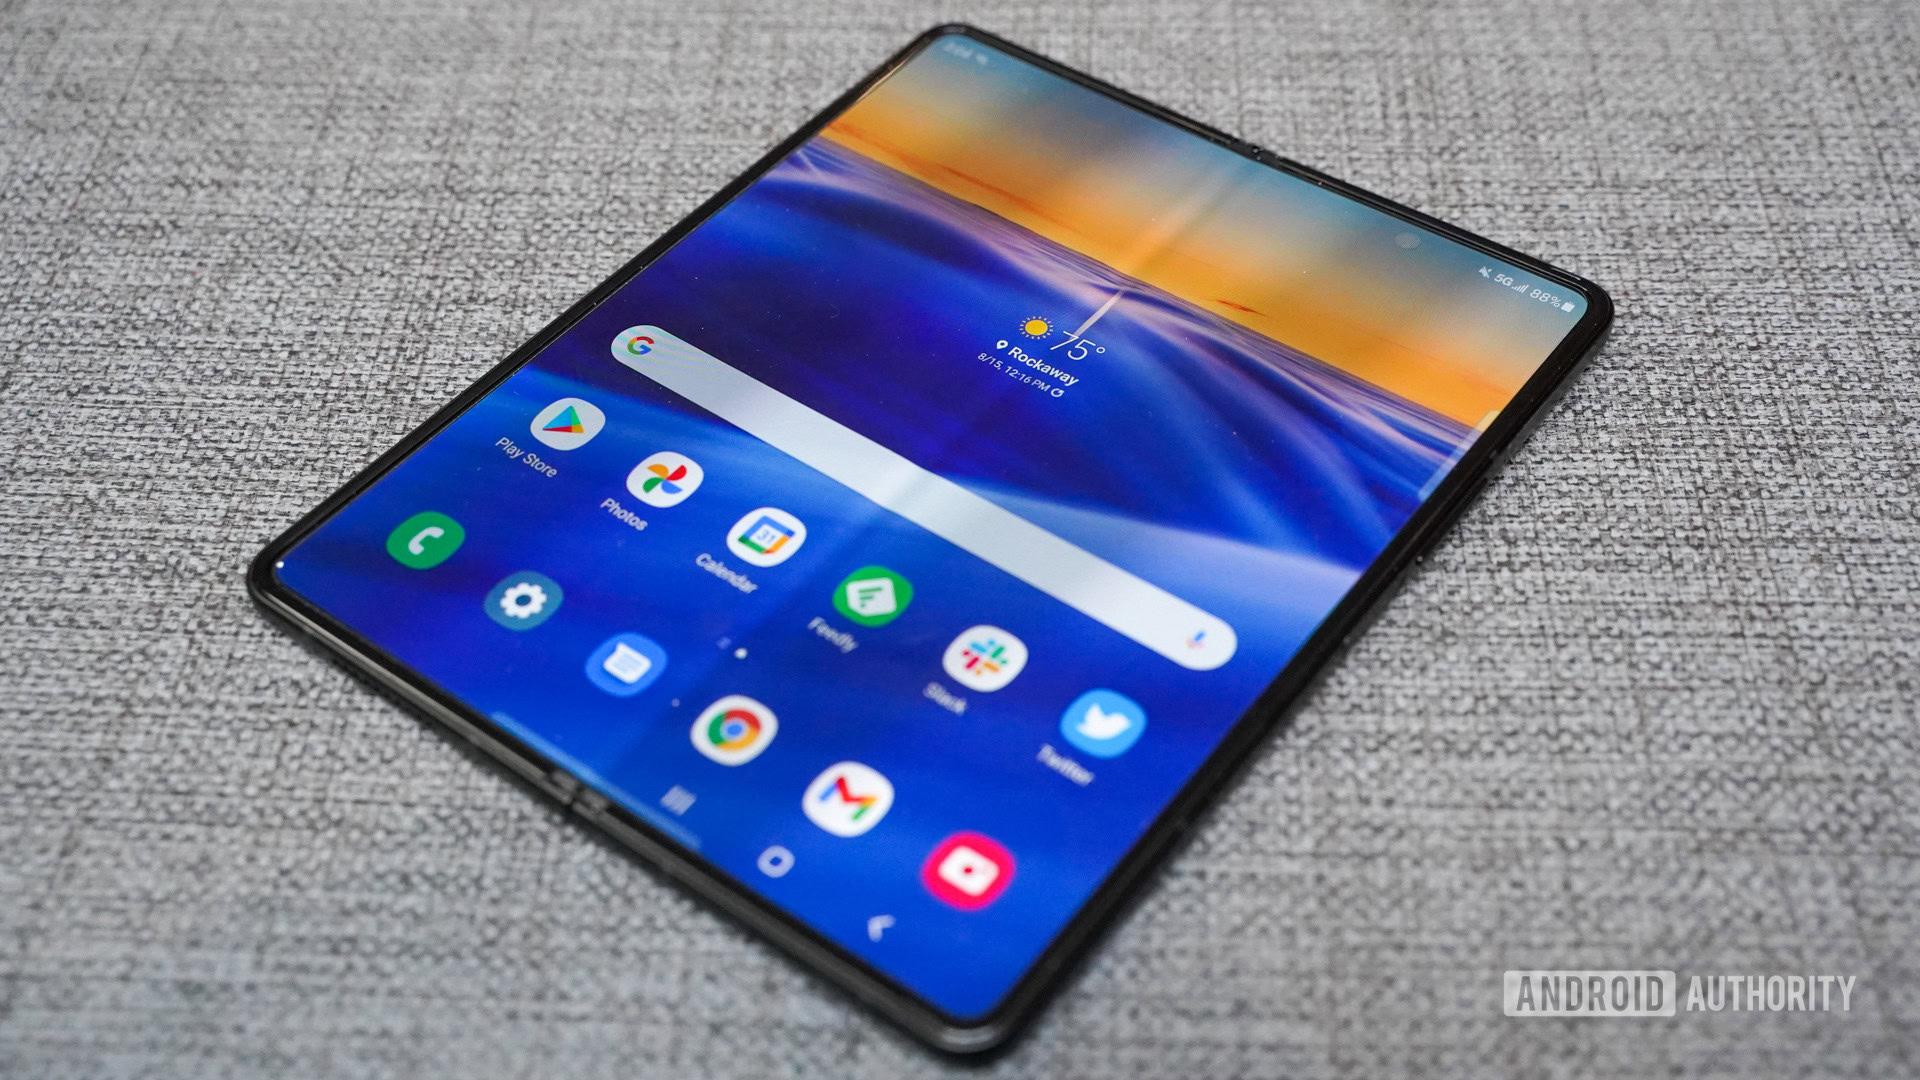 Best Galaxy Z Fold 3 features you need to know about - SamMobile